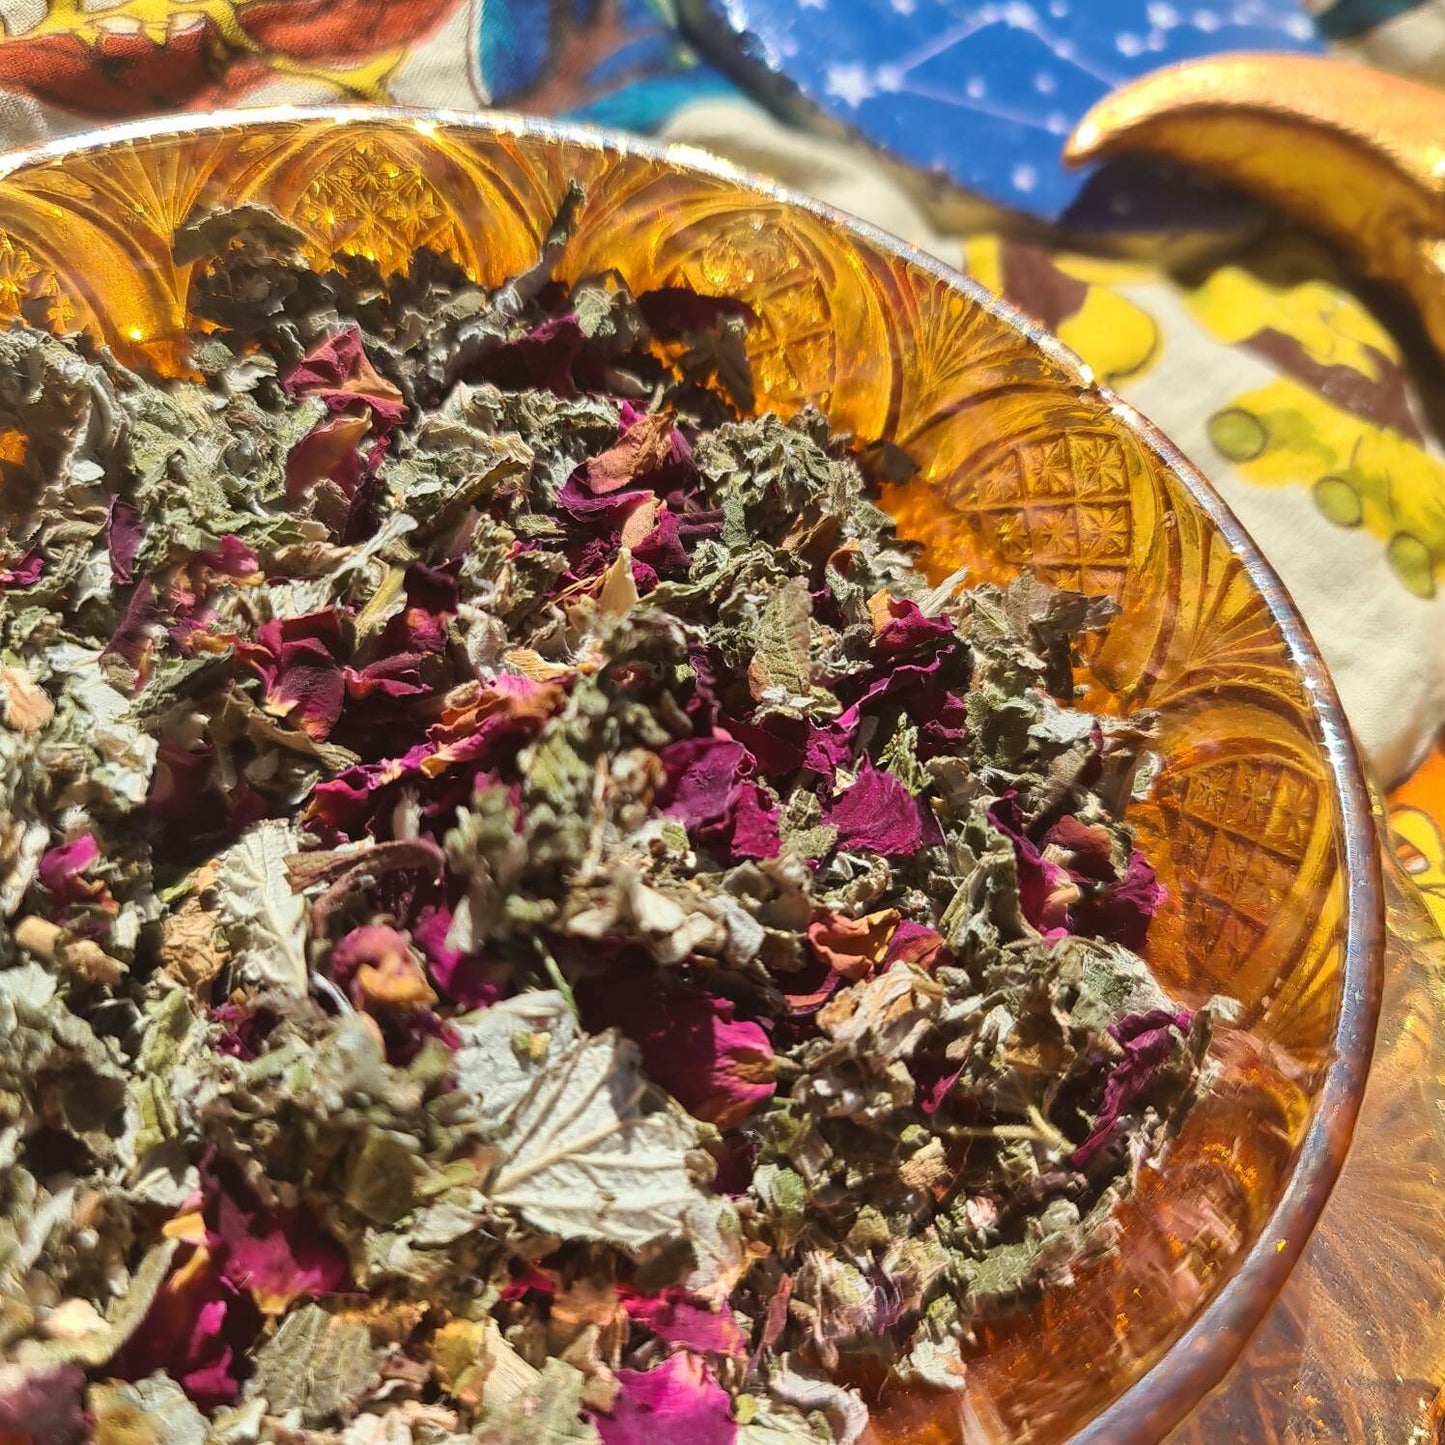 An enchanting close up image of The Dreamy Blend in a carnival glass bowl showcasing a blend of green raspberry leaf, mugwort, rose petals, and lavender. A celestial moon decoration with twinkling stars adorns the background, adding a touch of magic.